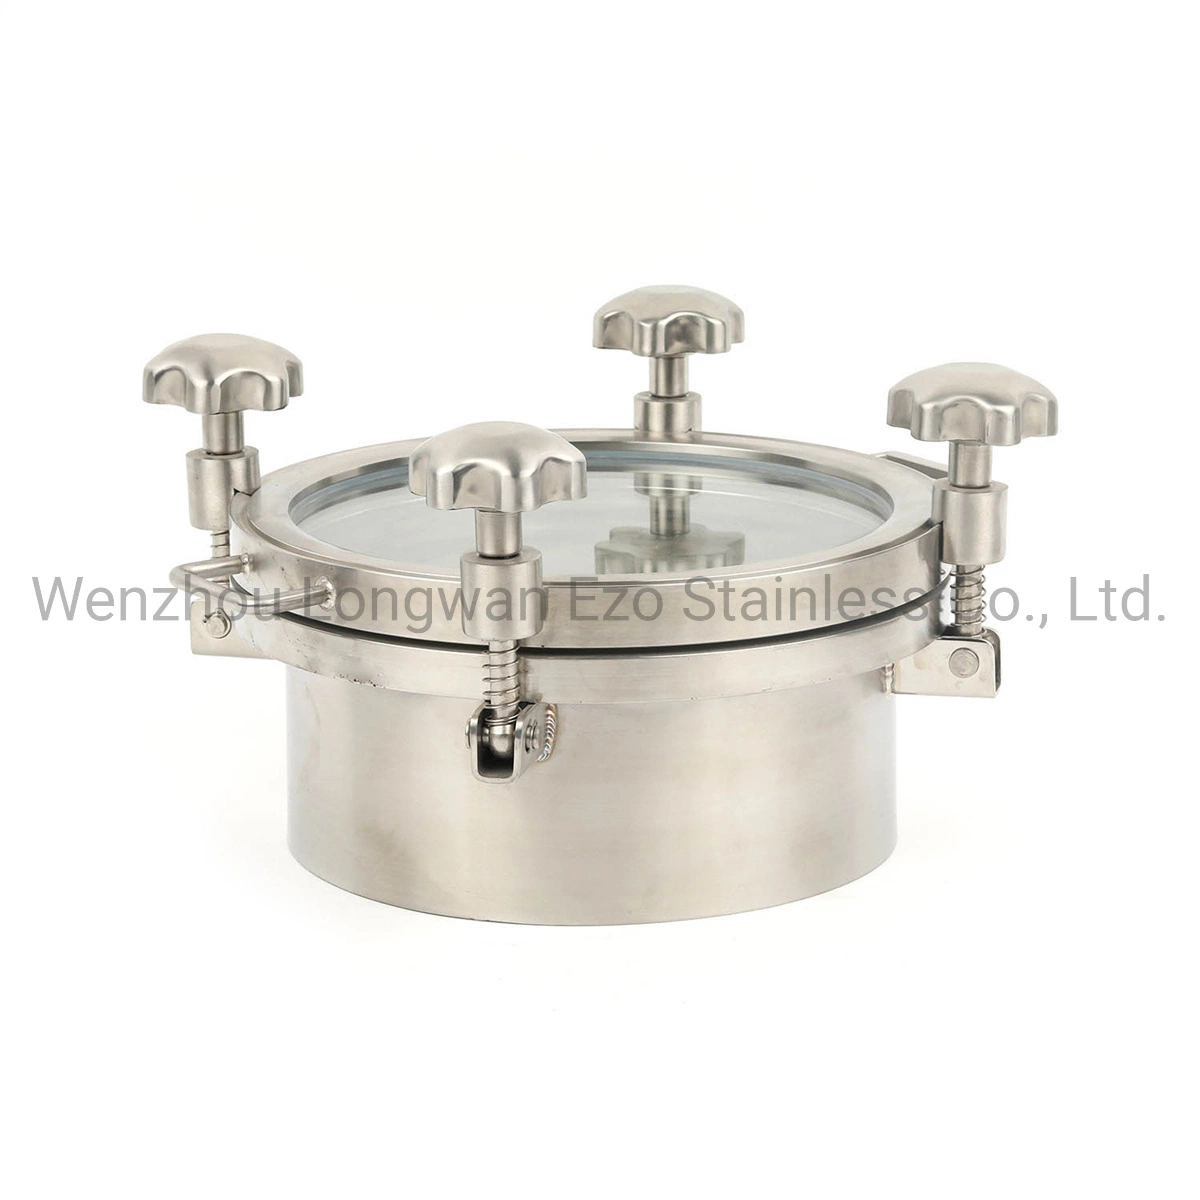 Stainless Steel 304/316L Food Grade Round Top Tank Manhole Cover with EPDM Seal